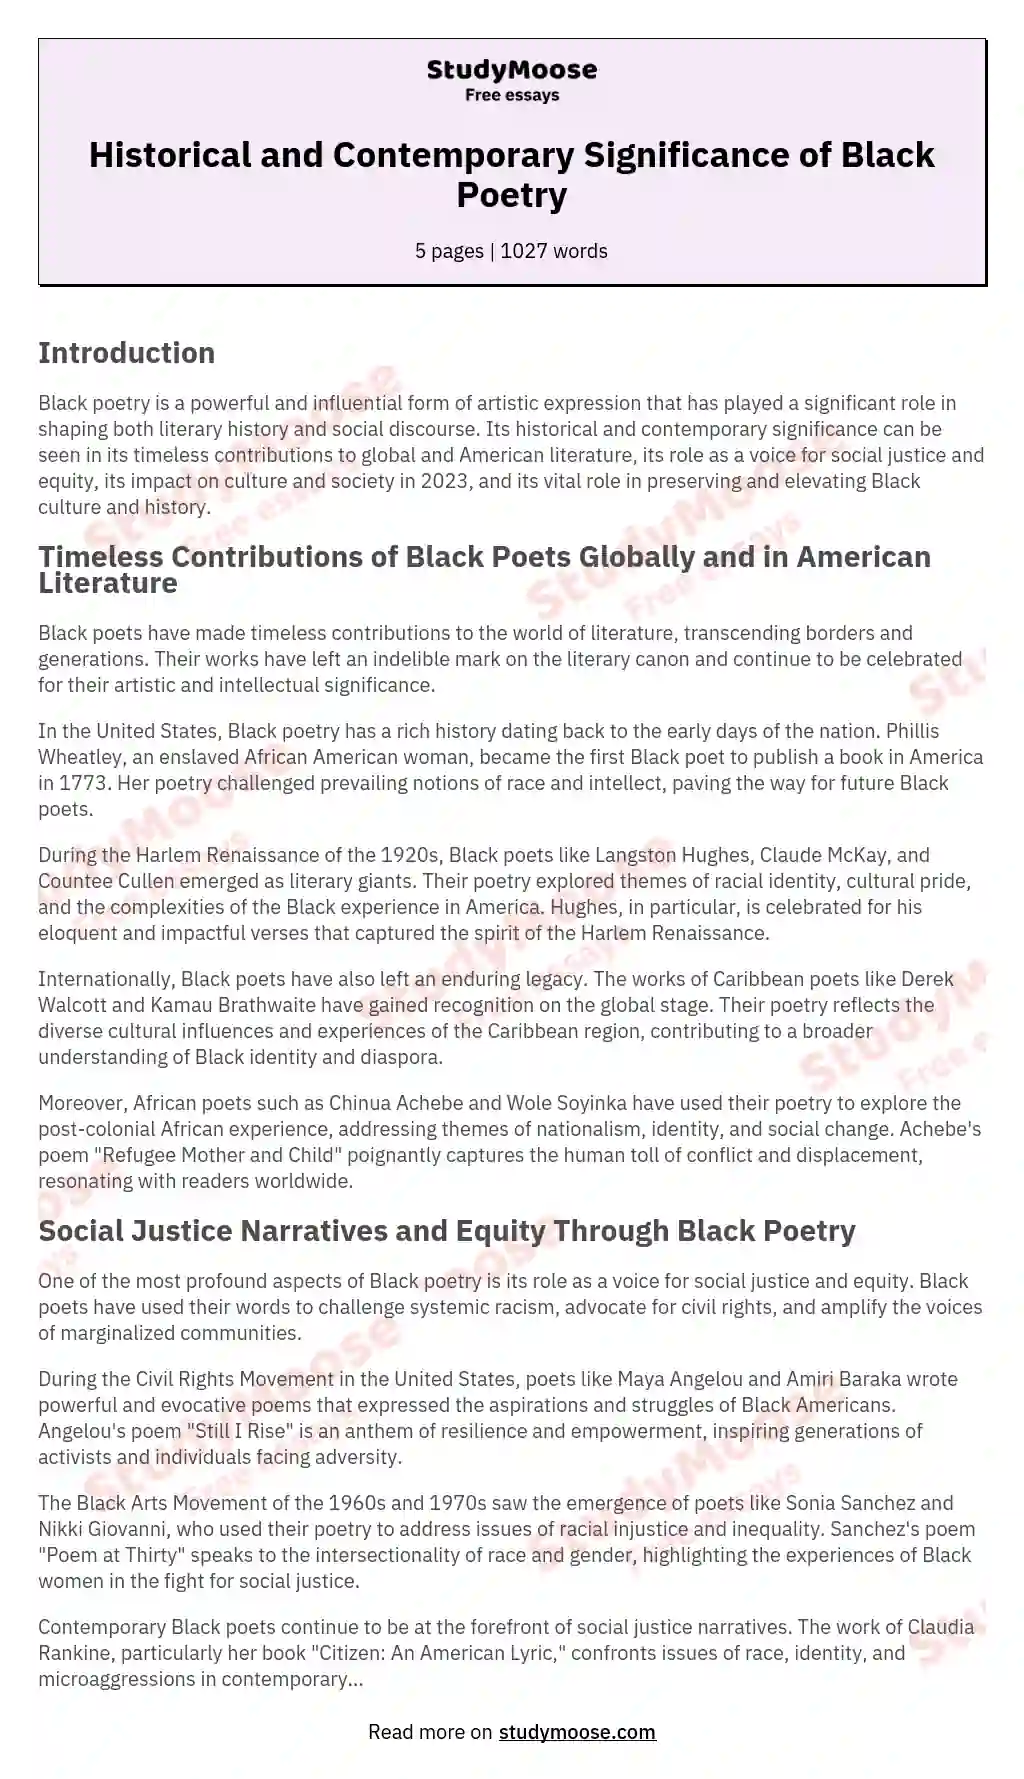 Historical and Contemporary Significance of Black Poetry essay